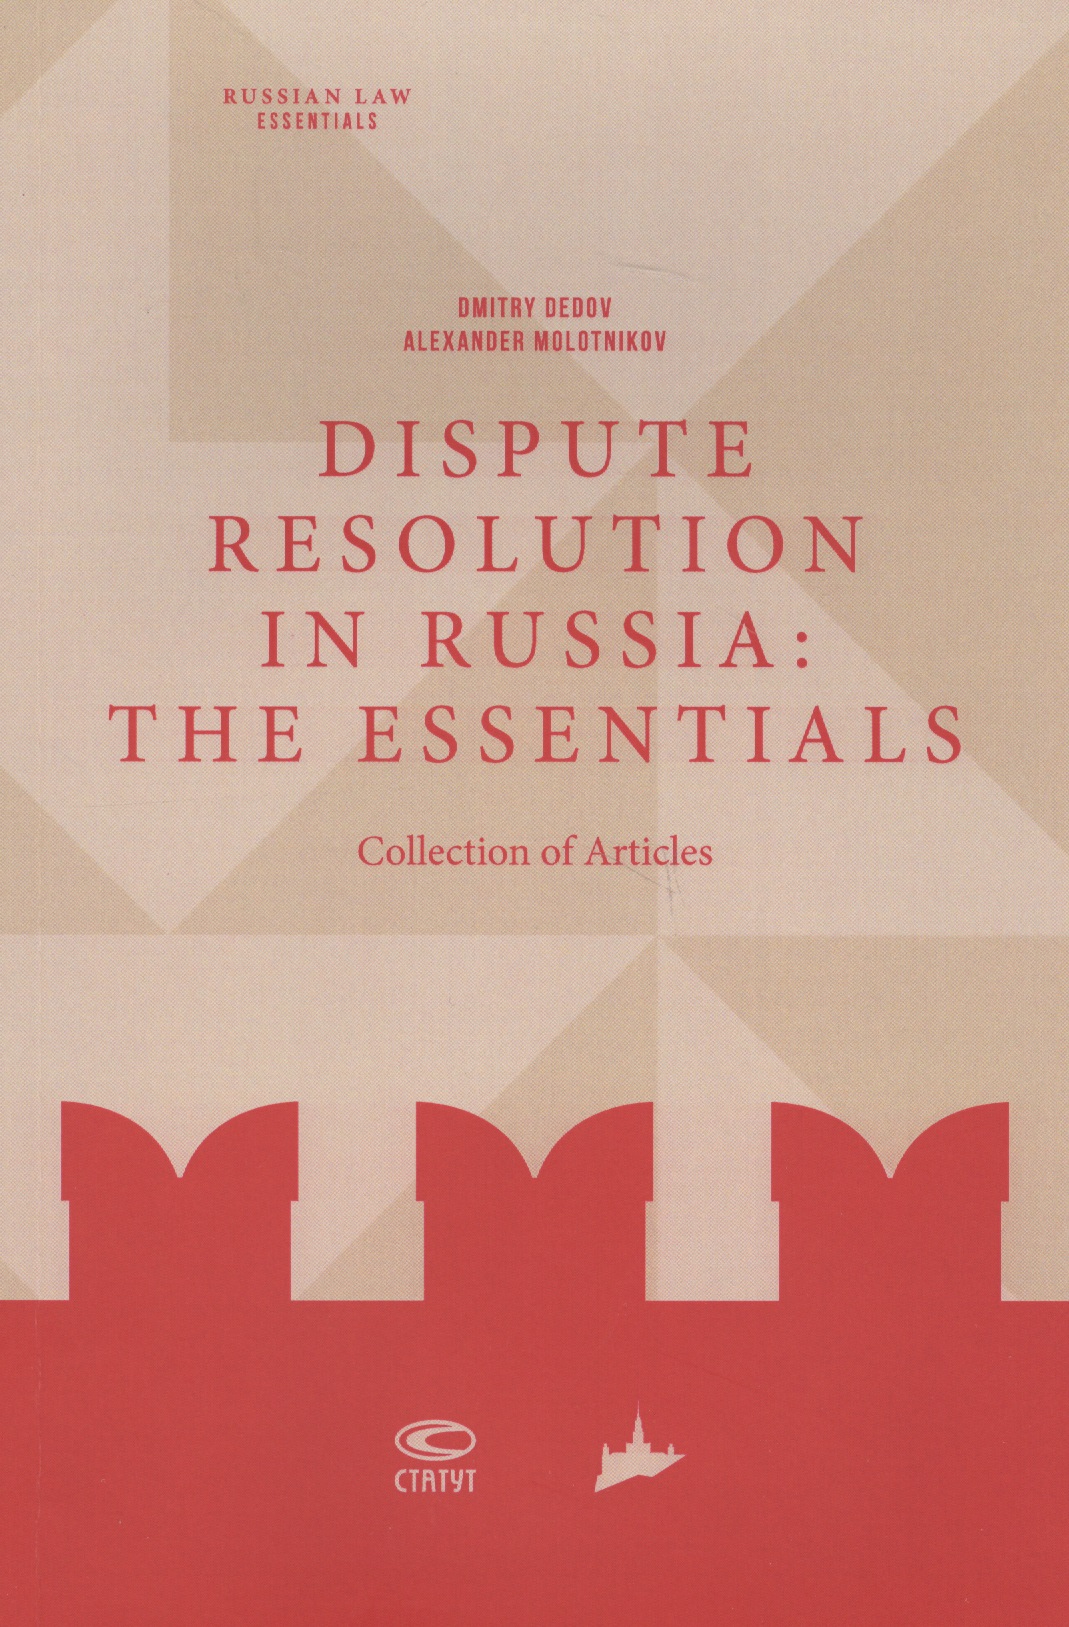 Дедов Дмитрий Иванович Dispute resolution in Russia: the essentials (collection of articles) chhibber preeti the sinister substitute